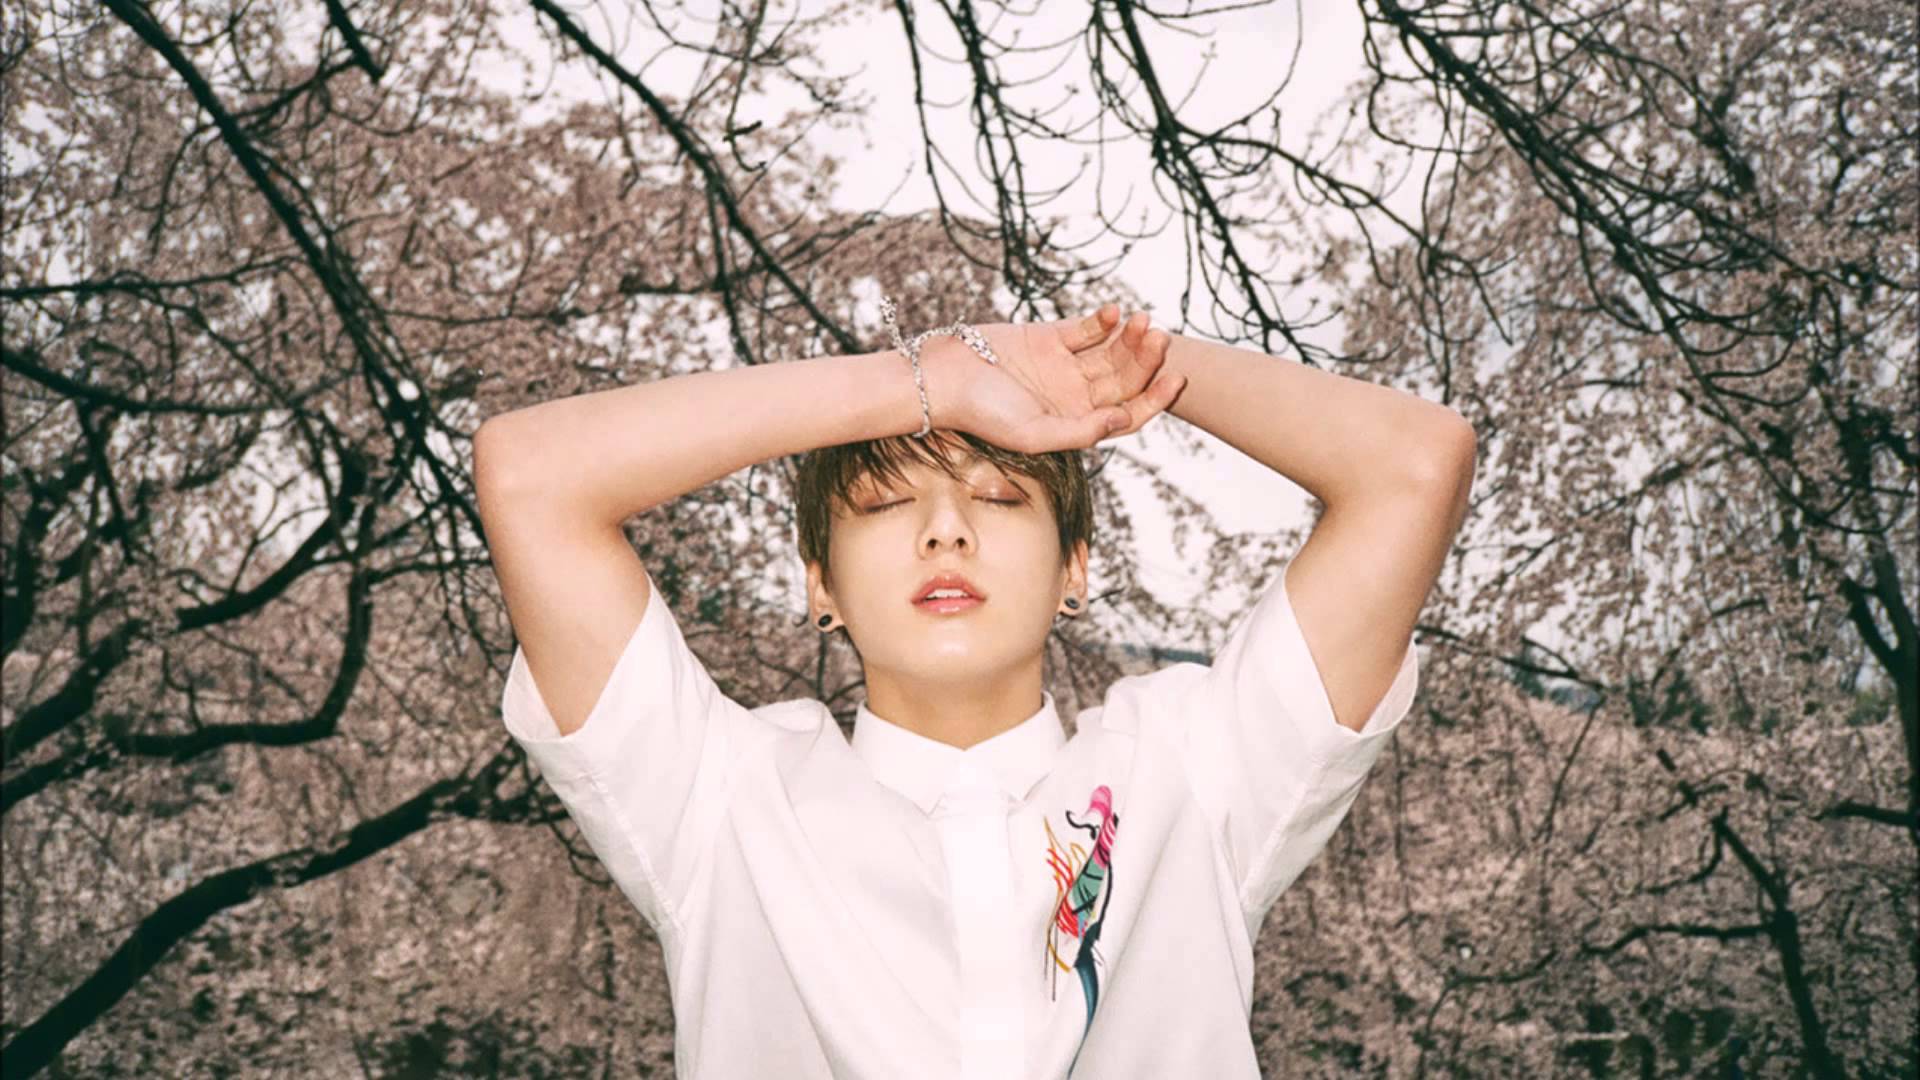 Jungkookie - Bts The Most Beautiful Moment In Life Part 1 Concept , HD Wallpaper & Backgrounds